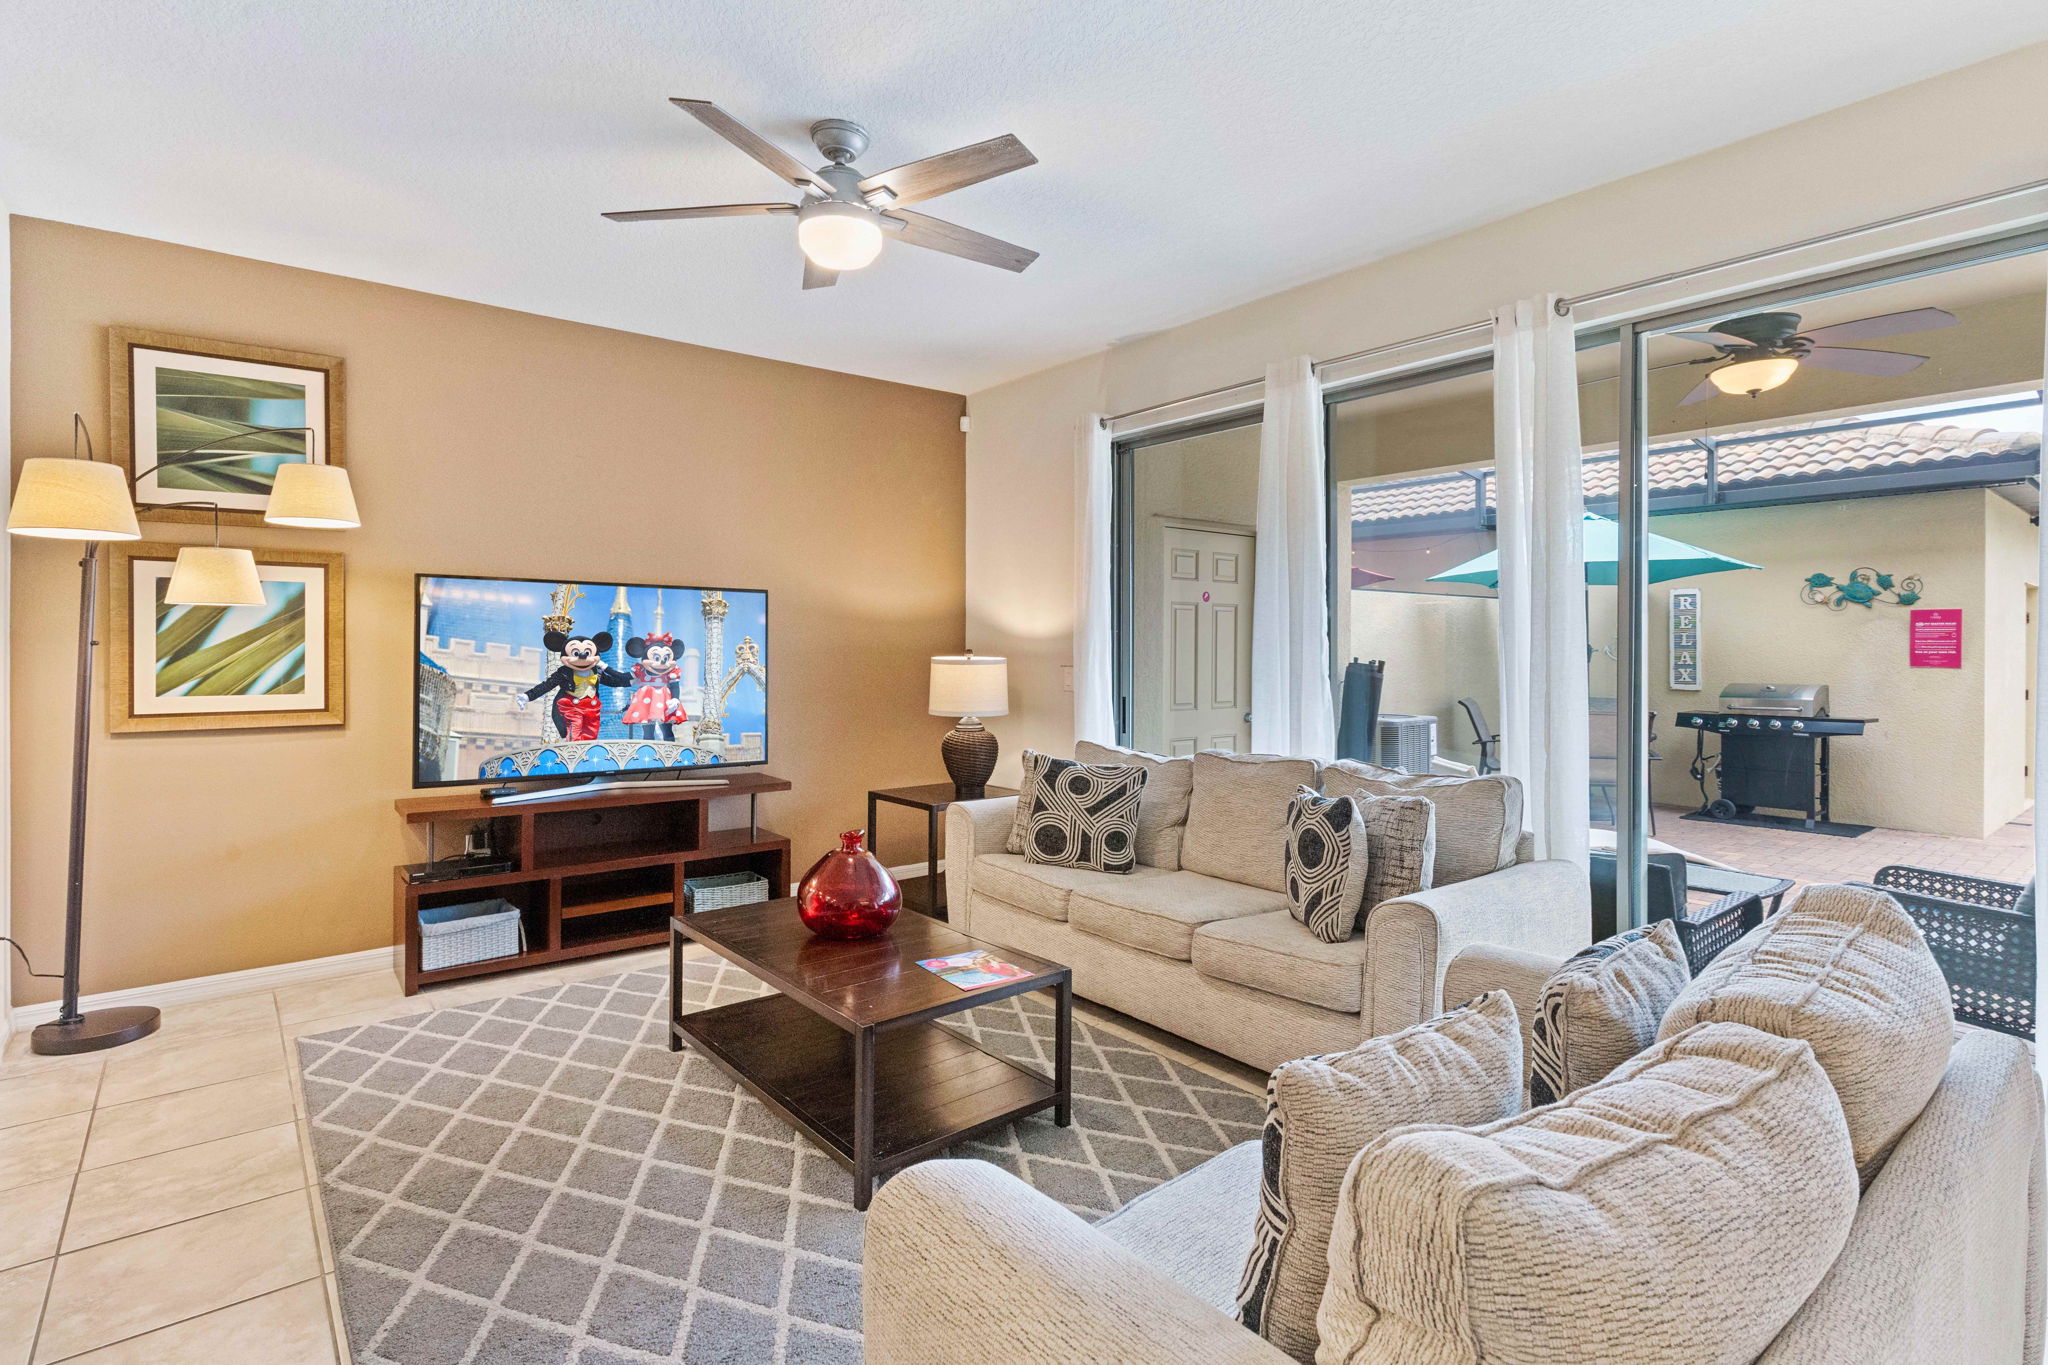 The living area, equipped with a smart TV, transforms into an entertainment oasis, where immersive experiences and cherished moments unfold in the comfort of home.